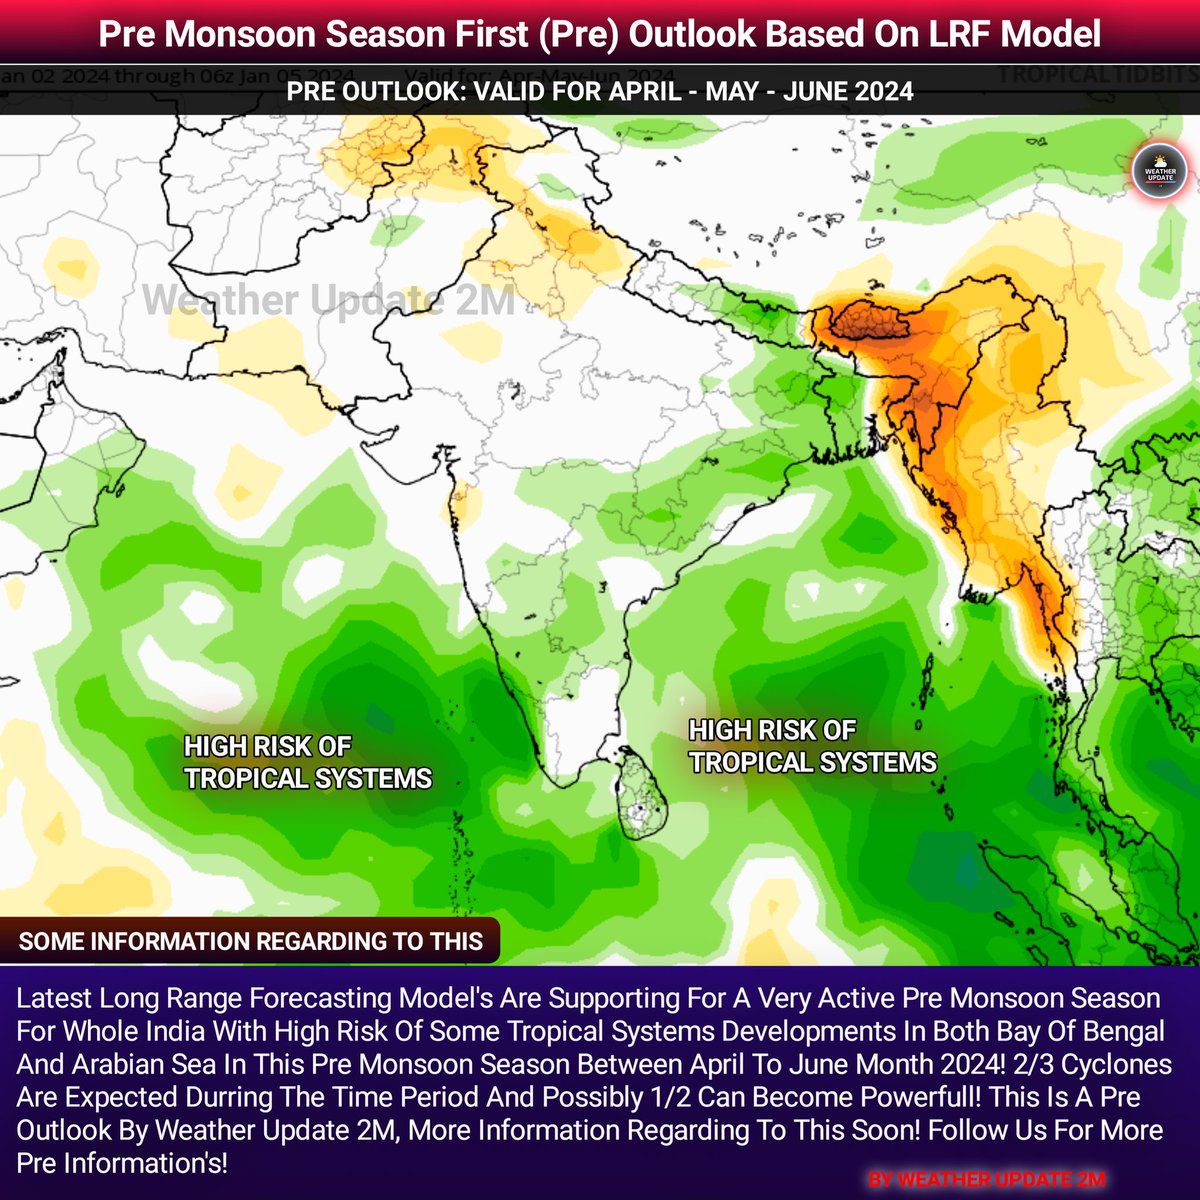 April - May - June Pre Monsoon Season Pre Outlook/Cyclone Information! Active Pre Monsoon Season Is Expected? Check The Graphic For Full Information! Join My WhatsApp Channel Now For Extra Info - 👇🏻 whatsapp.com/channel/0029Va… #wu2m #Weather #2024weather #Cyclones